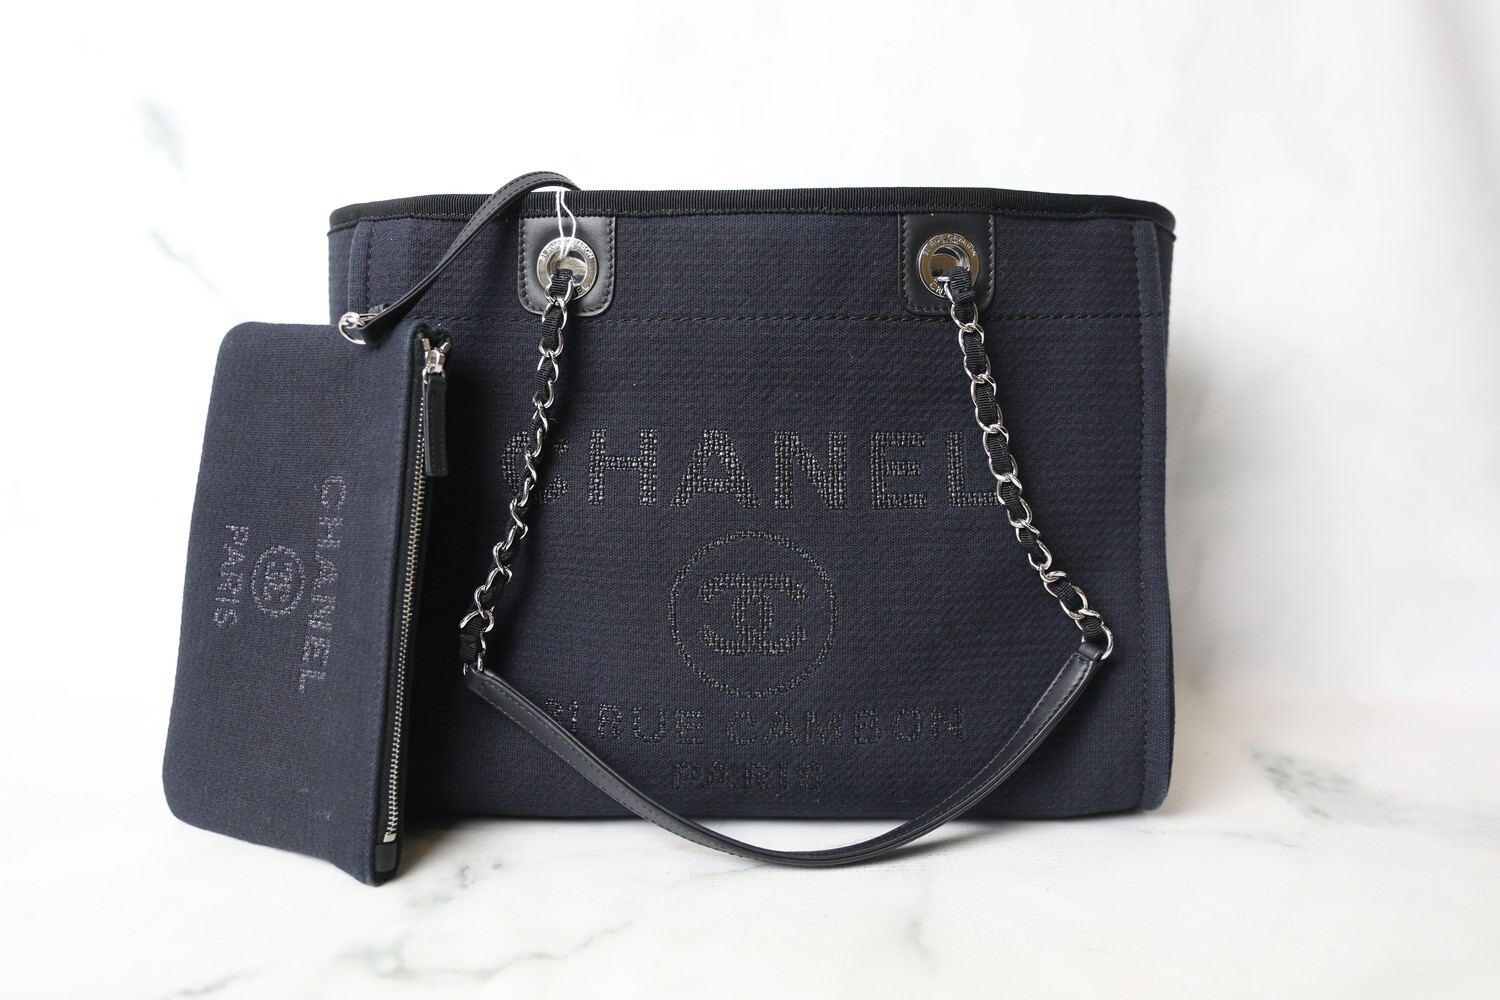 Chanel Deauville Small Tote Bag, Black Fabric with Silver Hardware,  Preowned in Box WA001